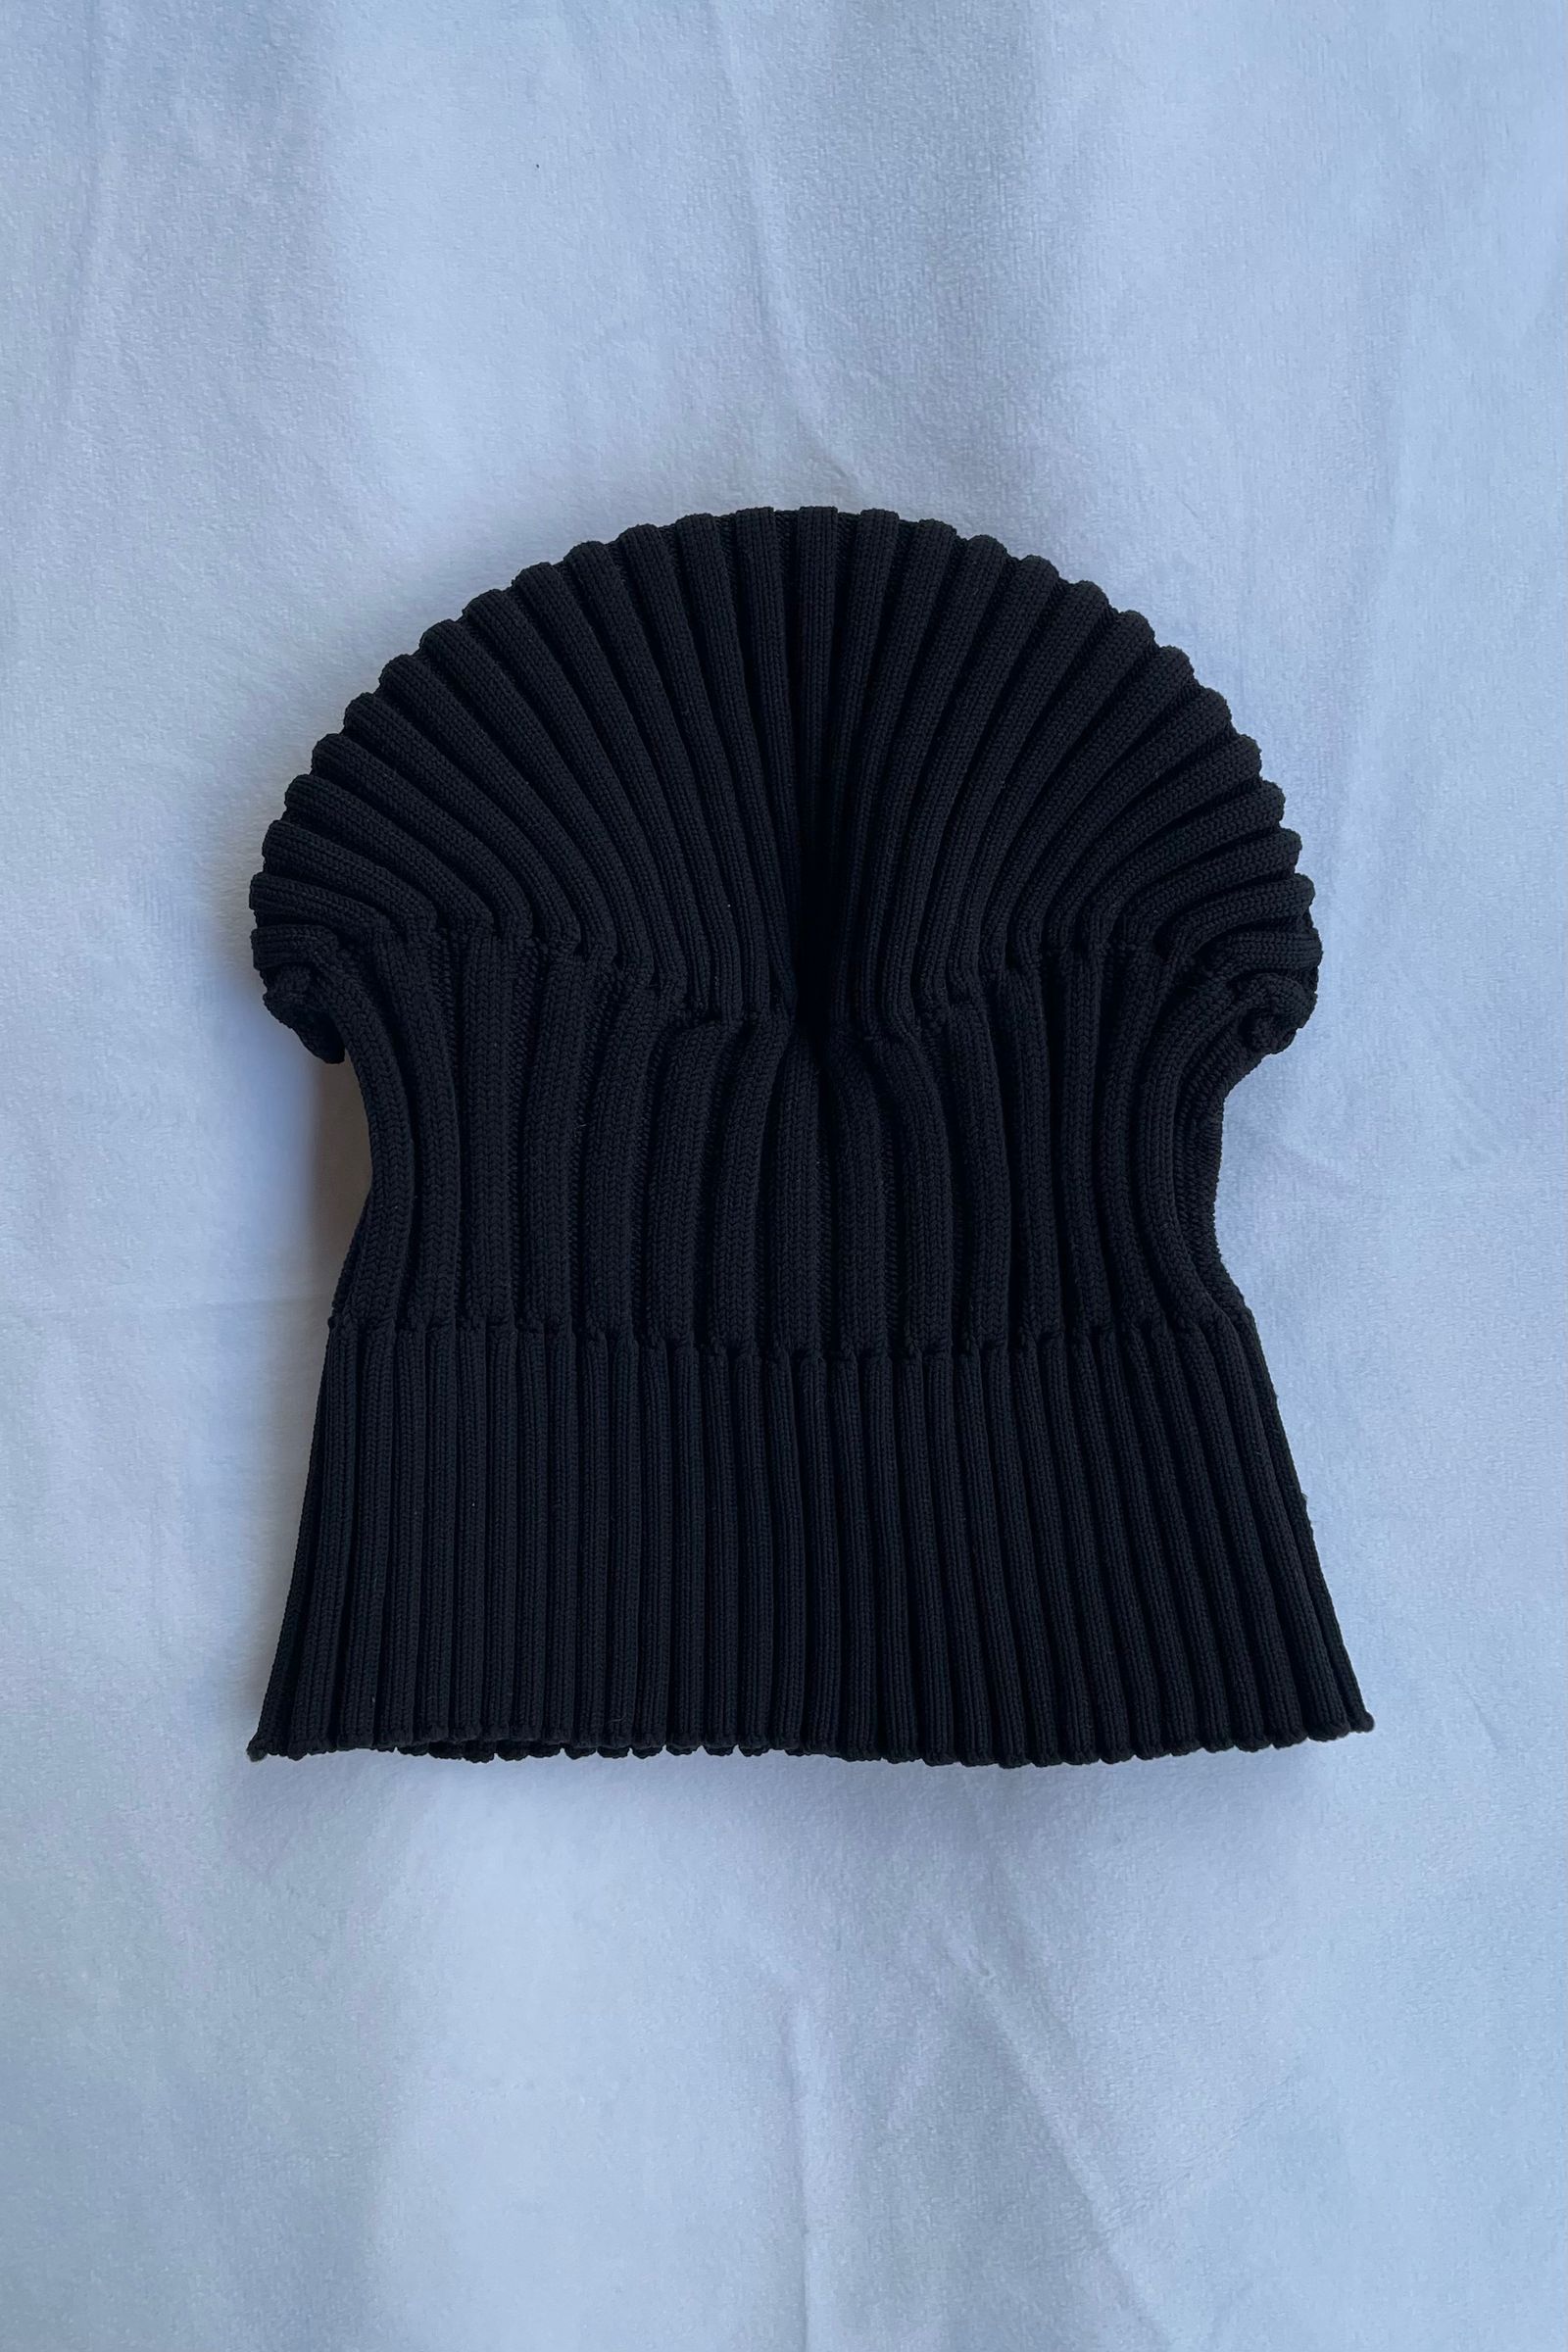 CFCL - fluted knit cap 1 -charcoal- 22aw unisex | asterisk